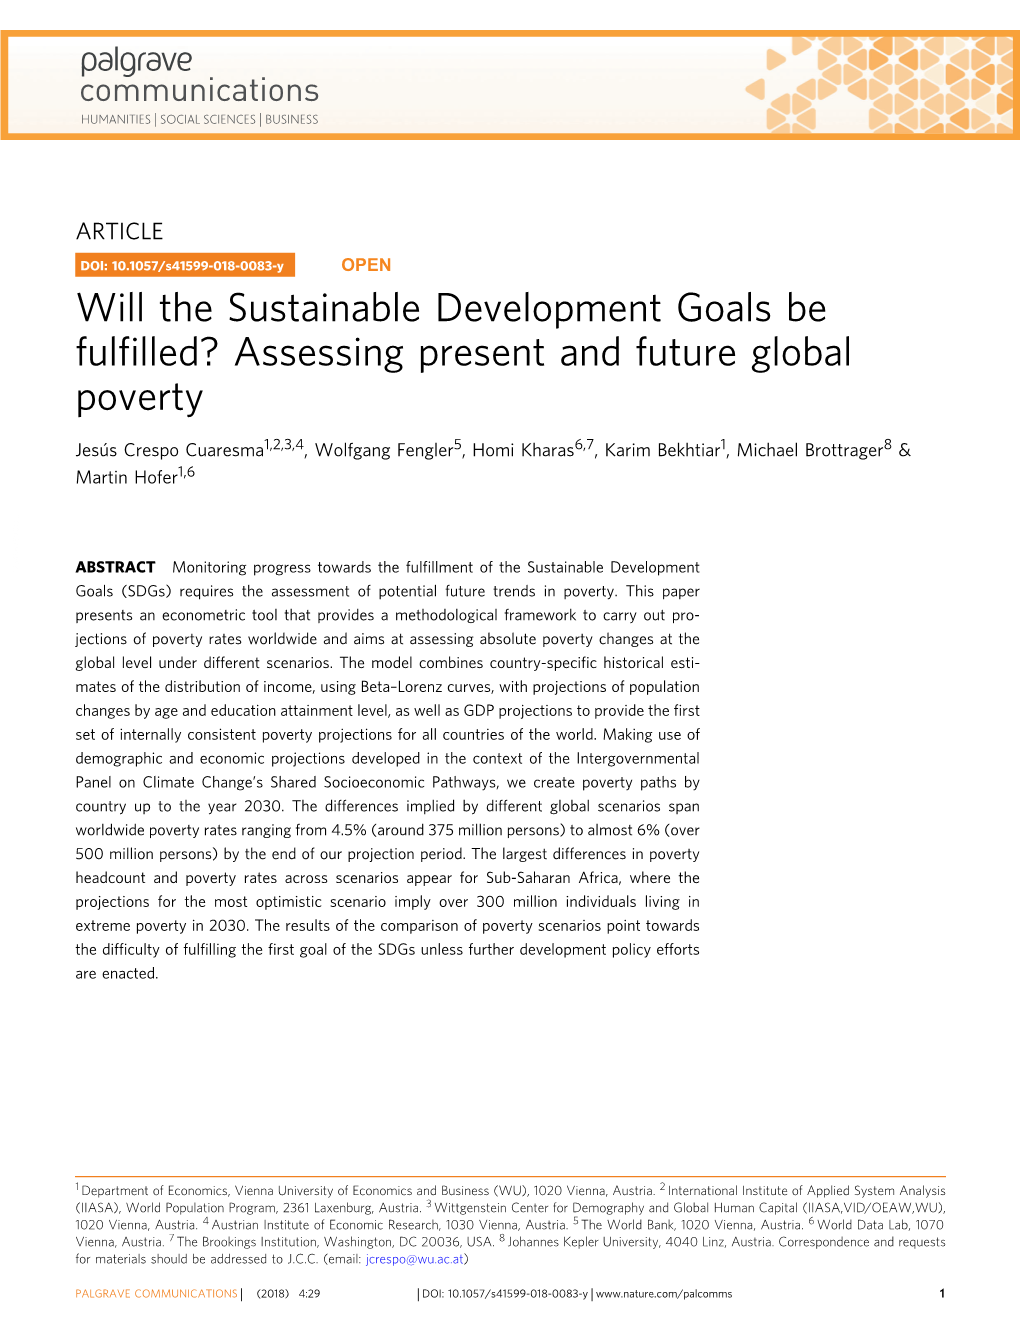 Assessing Present and Future Global Poverty